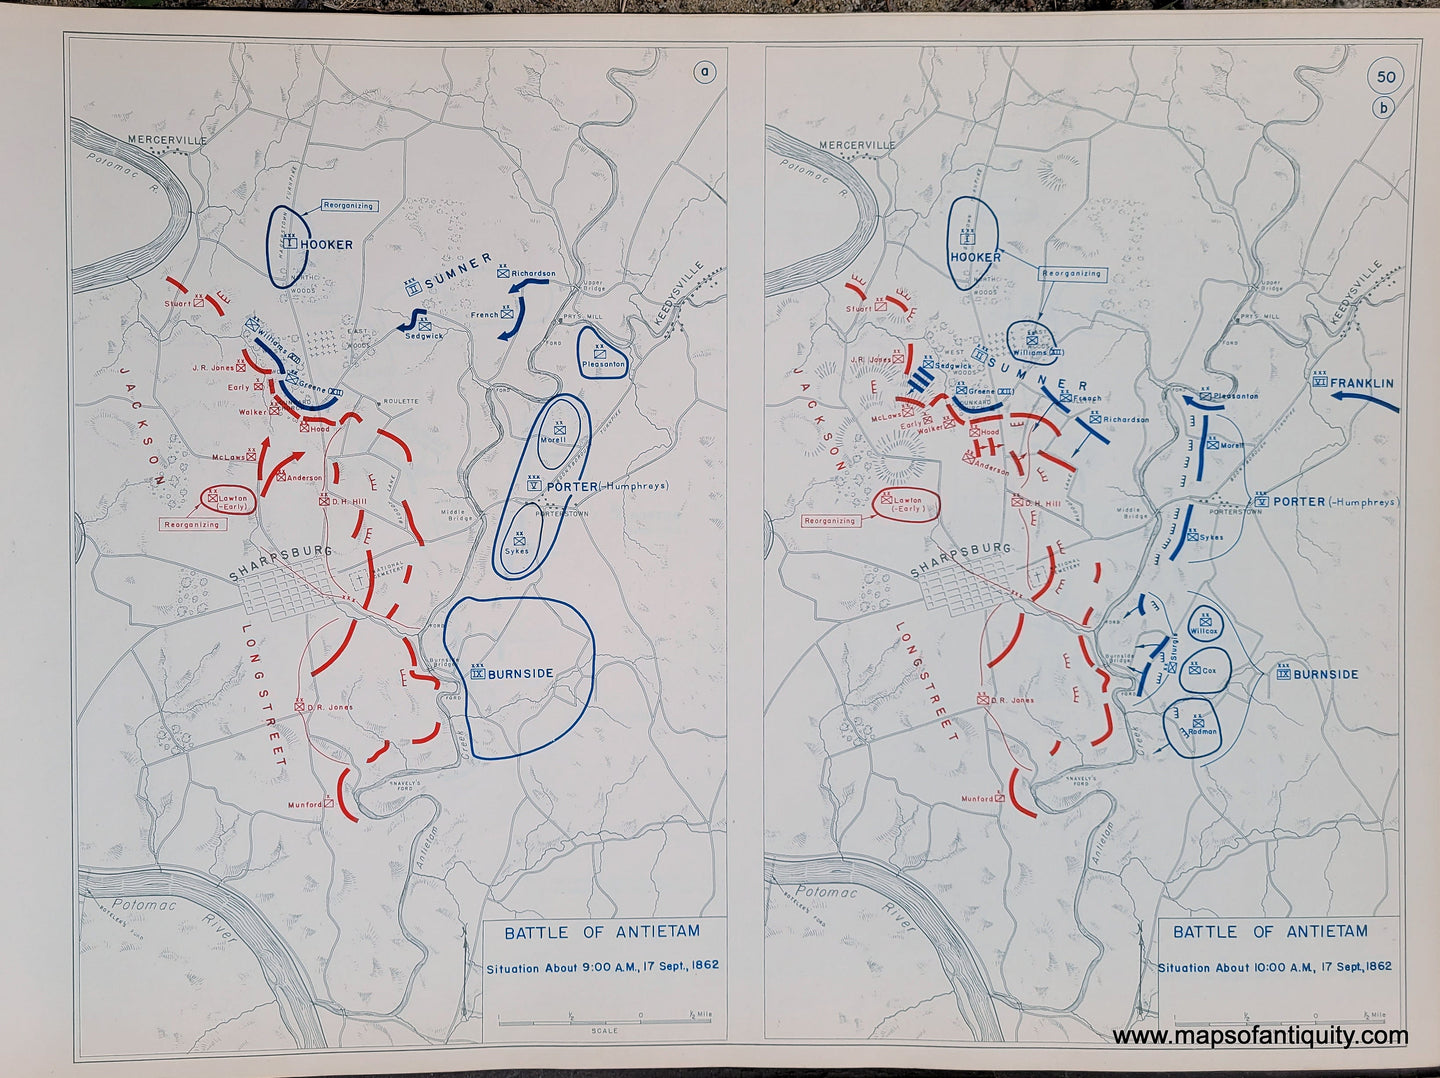 Genuine-Antique-Map-Battle-of-Antietam-Situation-About-9-00-AM-17-Sept--1862-and-Situation-About-10-00-AM-17-Sept--1862-1948-Matthew-Forney-Steele-Dept-of-Military-Art-and-Engineering-US-Military-Academy-West-Point-Maps-Of-Antiquity